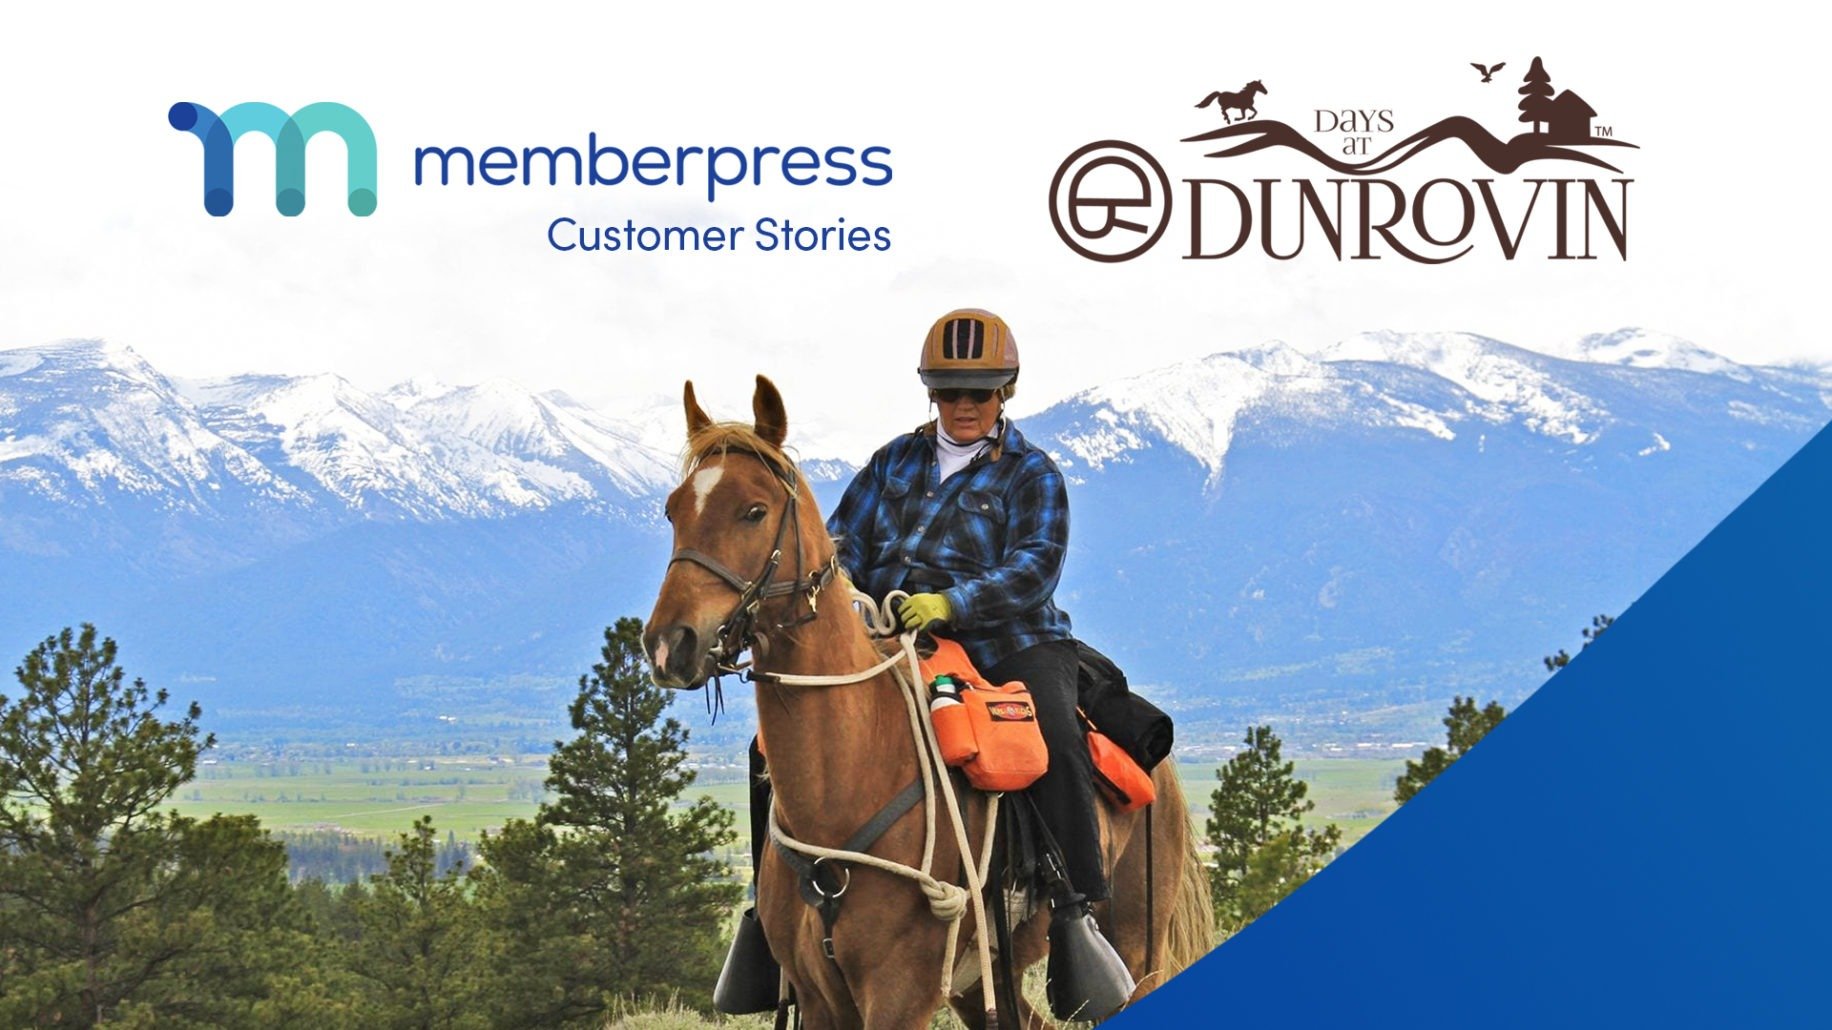 A woman is riding a horse in front of a mountainous landscape Text at the top reads MemberPress Customer Stories accompanied by the Days at Dunrovin logo